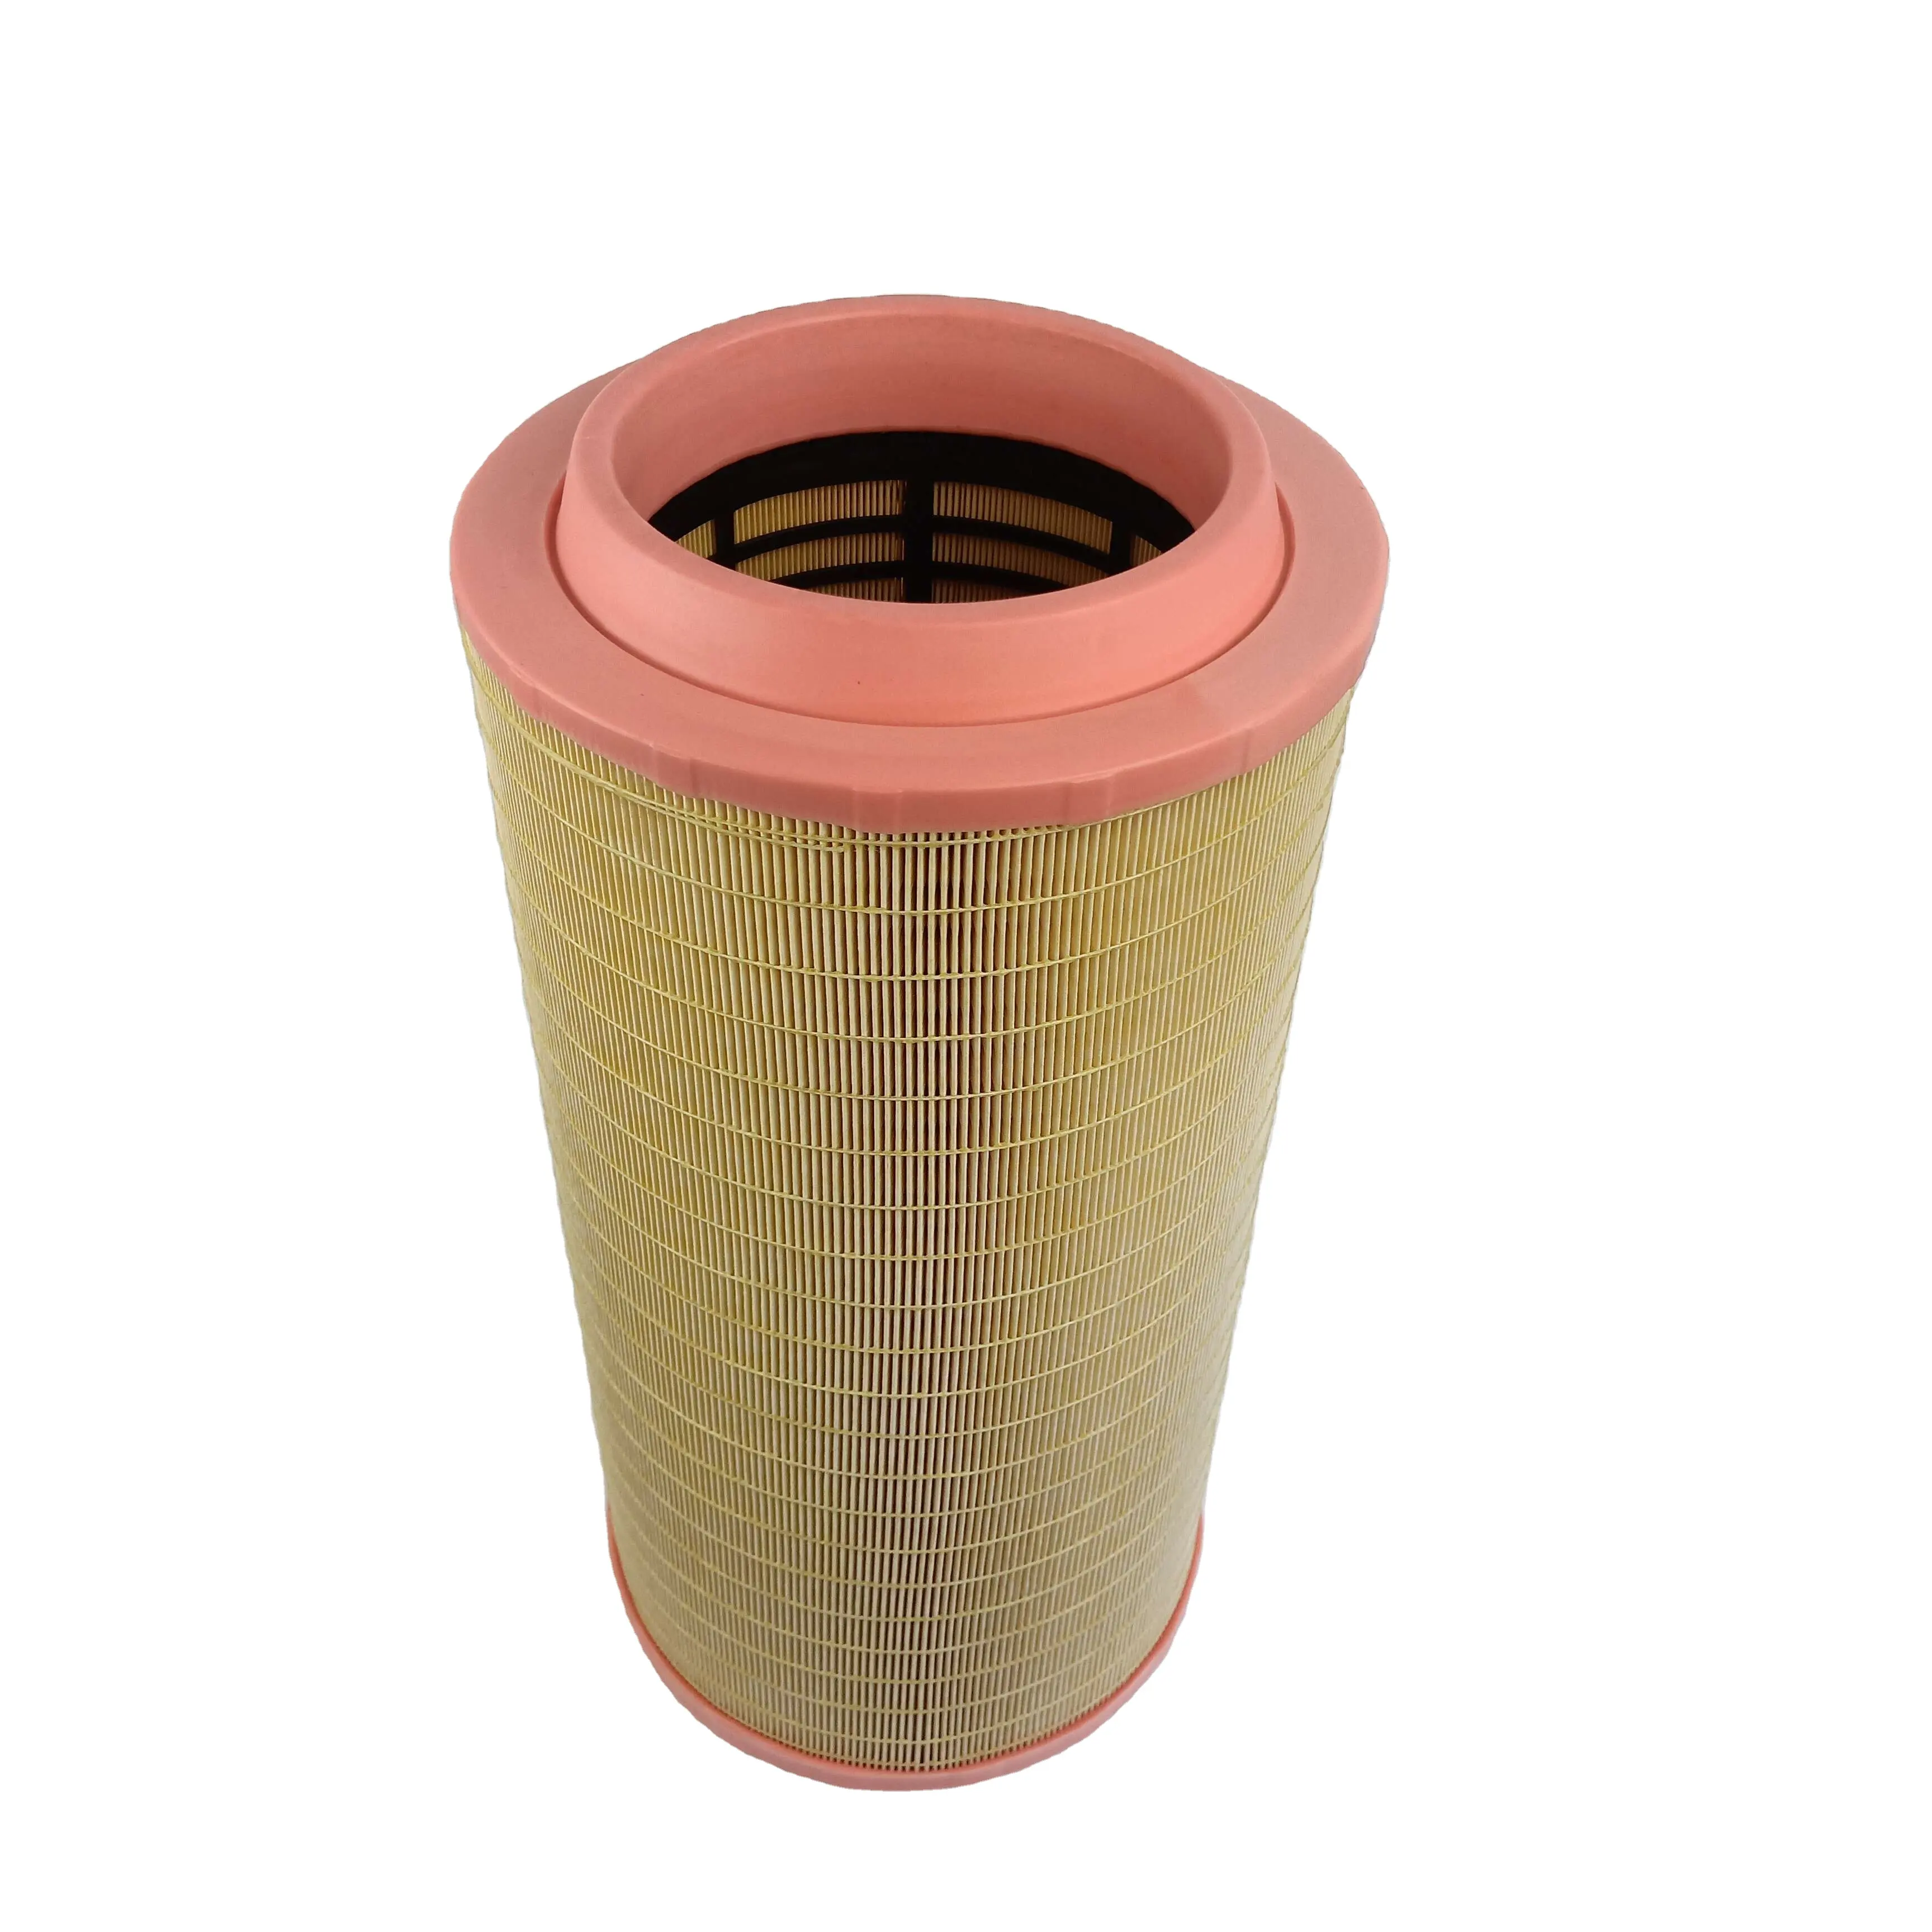 AH212294 other Industrial Filtration Equipment filter cartridge dust collector high efficiency impurity removal air filter